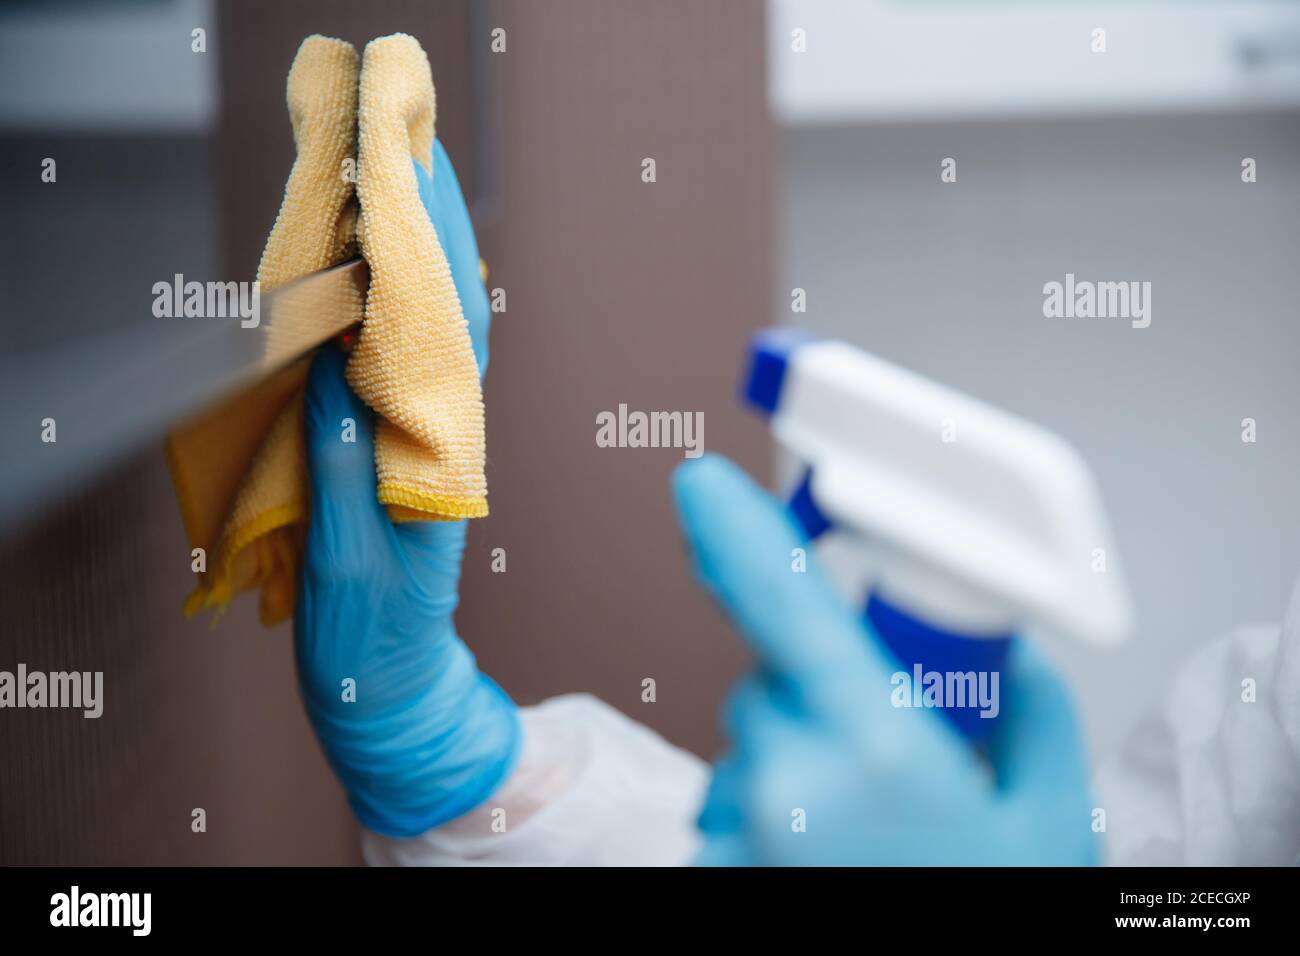 Tv Handle With Care High Resolution Stock Photography and Images - Alamy